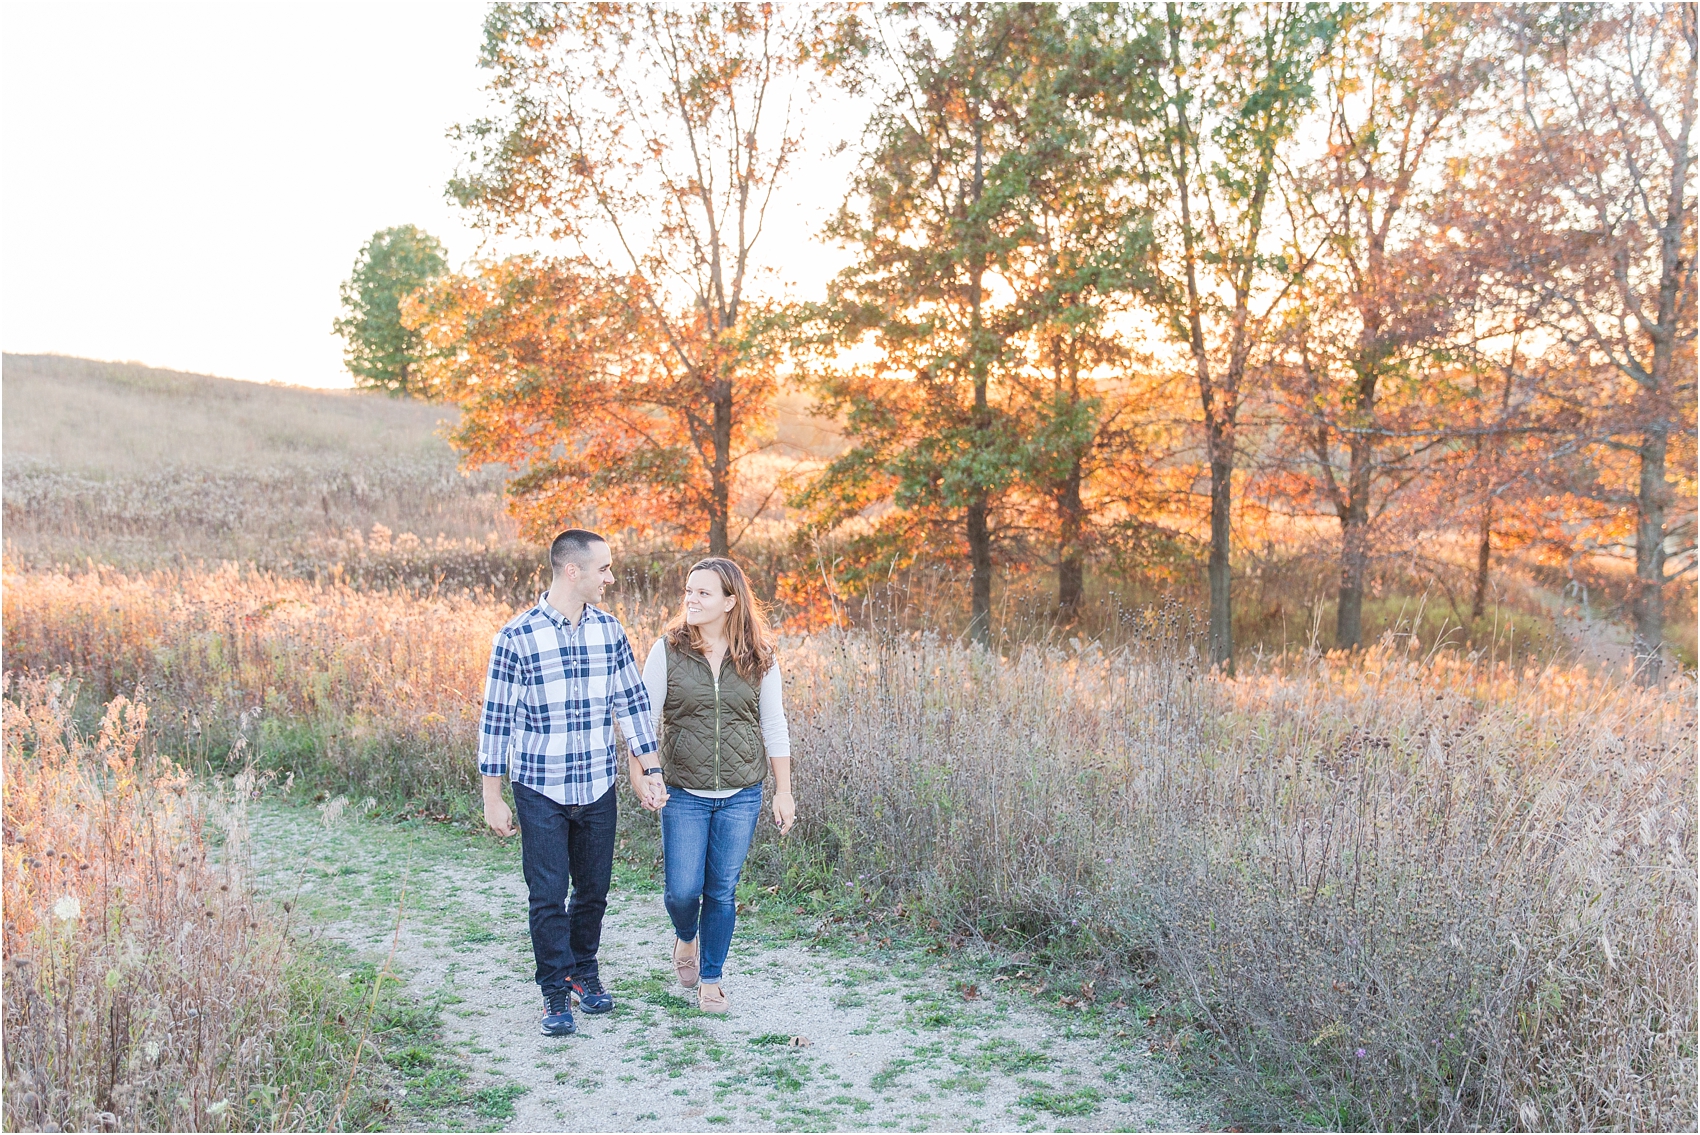 romantic-fall-engagement-photos-at-indian-springs-metropark-in-clarkston-mi-by-courtney-carolyn-photography_0012.jpg